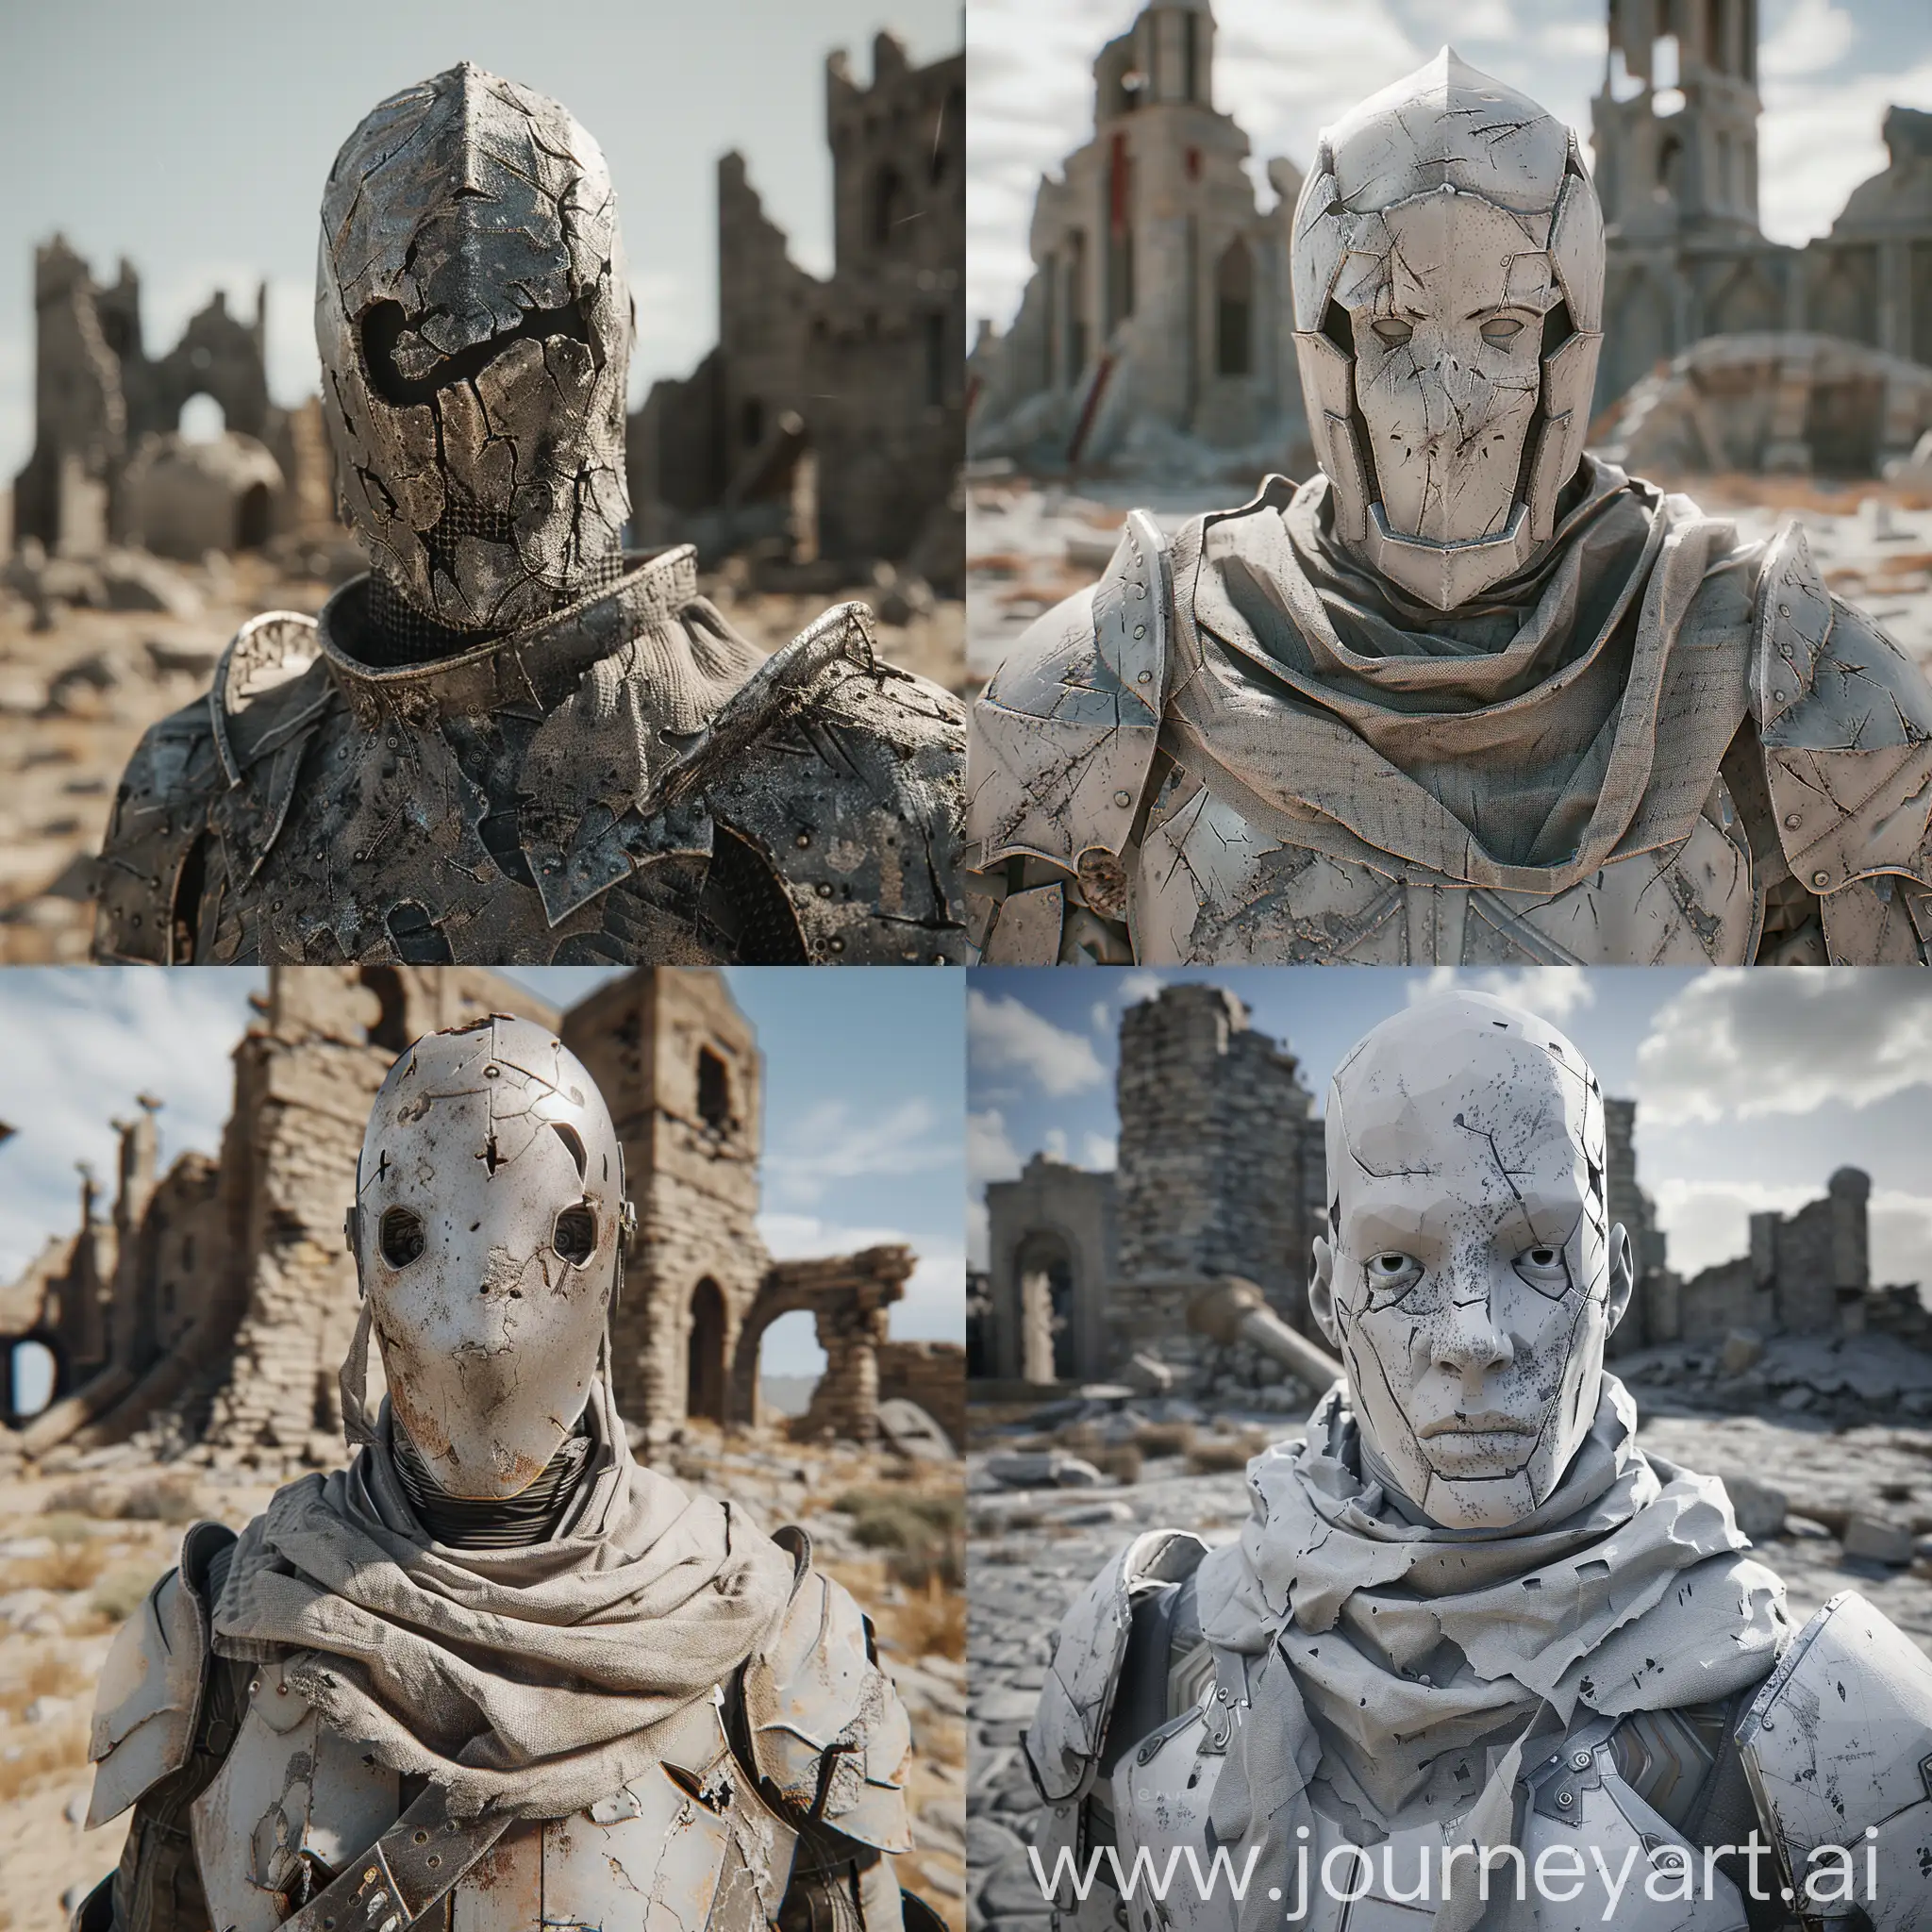 Desolate-KnightLike-Armored-Robot-in-TimeWorn-Castle-Ruins